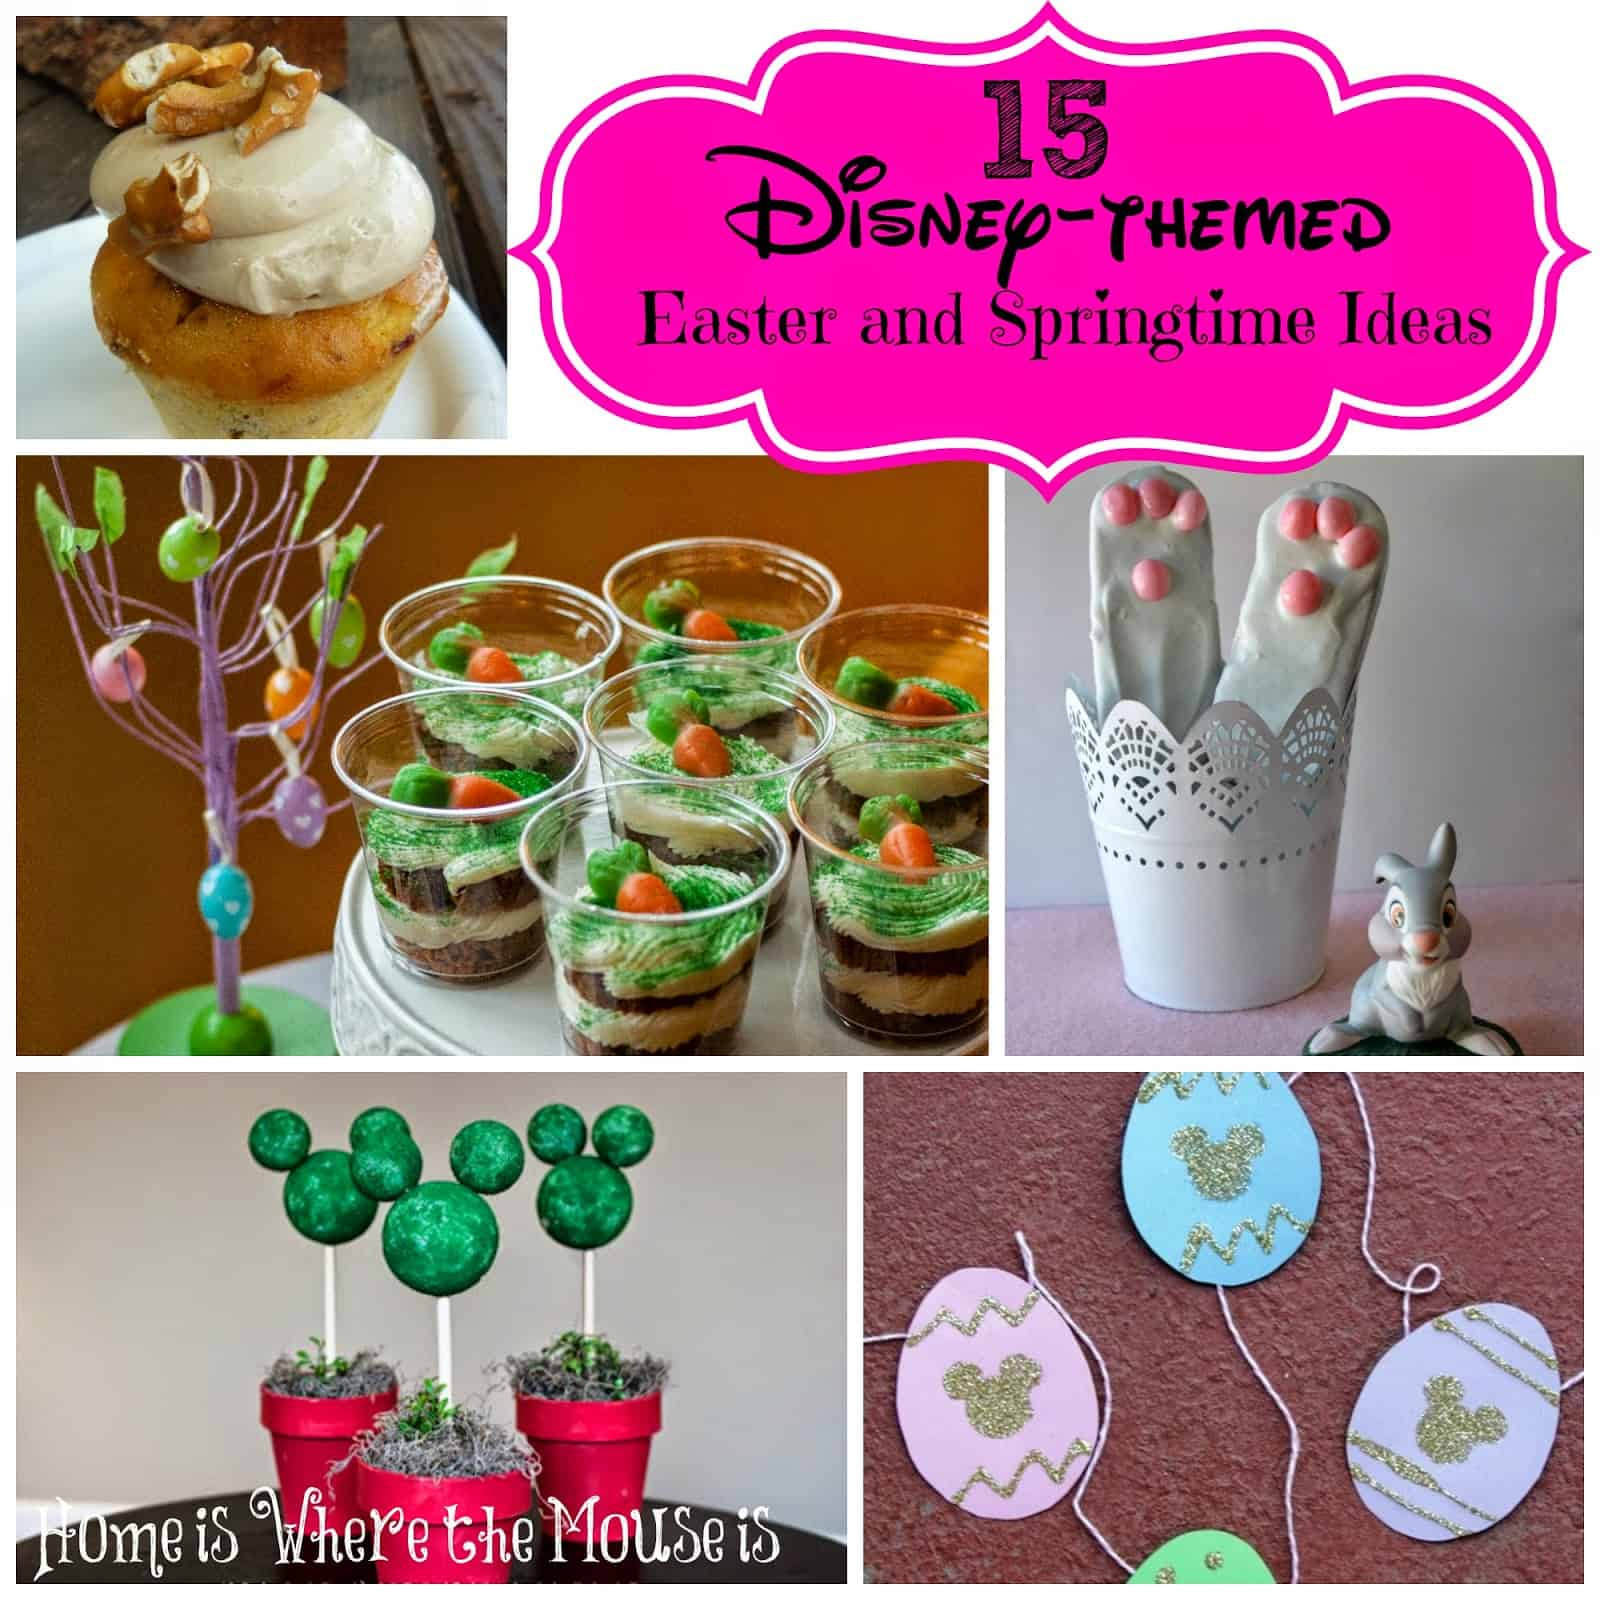 School Easter Party Ideas
 15 Disney themed Easter and Springtime Ideas